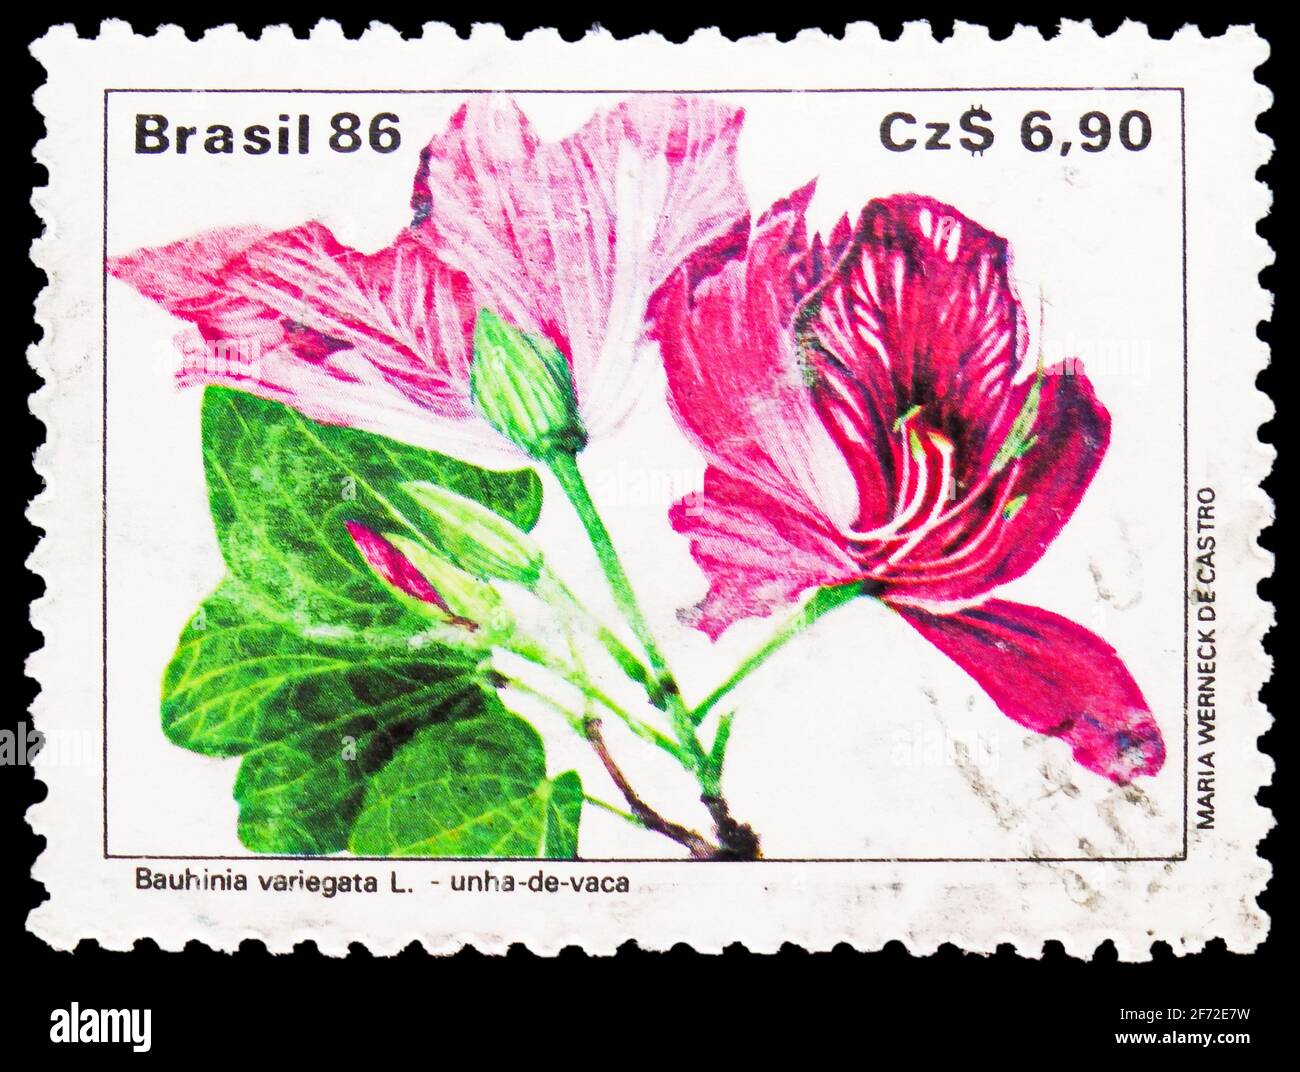 MOSCOW, RUSSIA - JANUARY 20, 2021: Postage stamp printed in Brazil shows Bauhinia variegata, Flora serie, circa 1986 Stock Photo